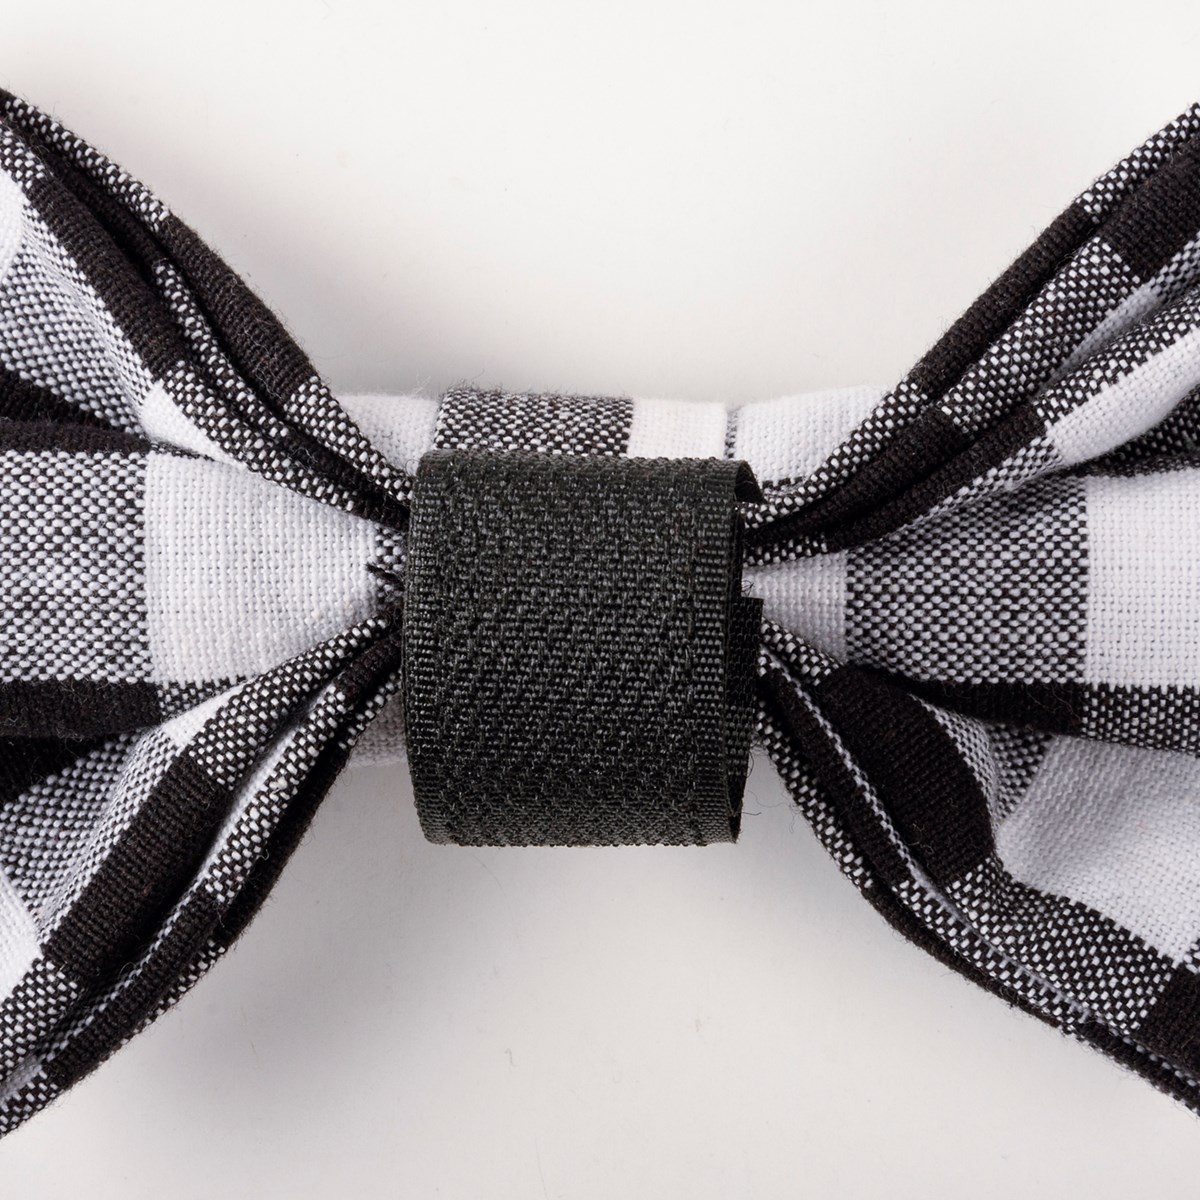 Pet Bow Tie Set Lg - Buffalo Check - 5.50" x 3.50" x 2" - Cotton, Hook-and-Loop Fastener